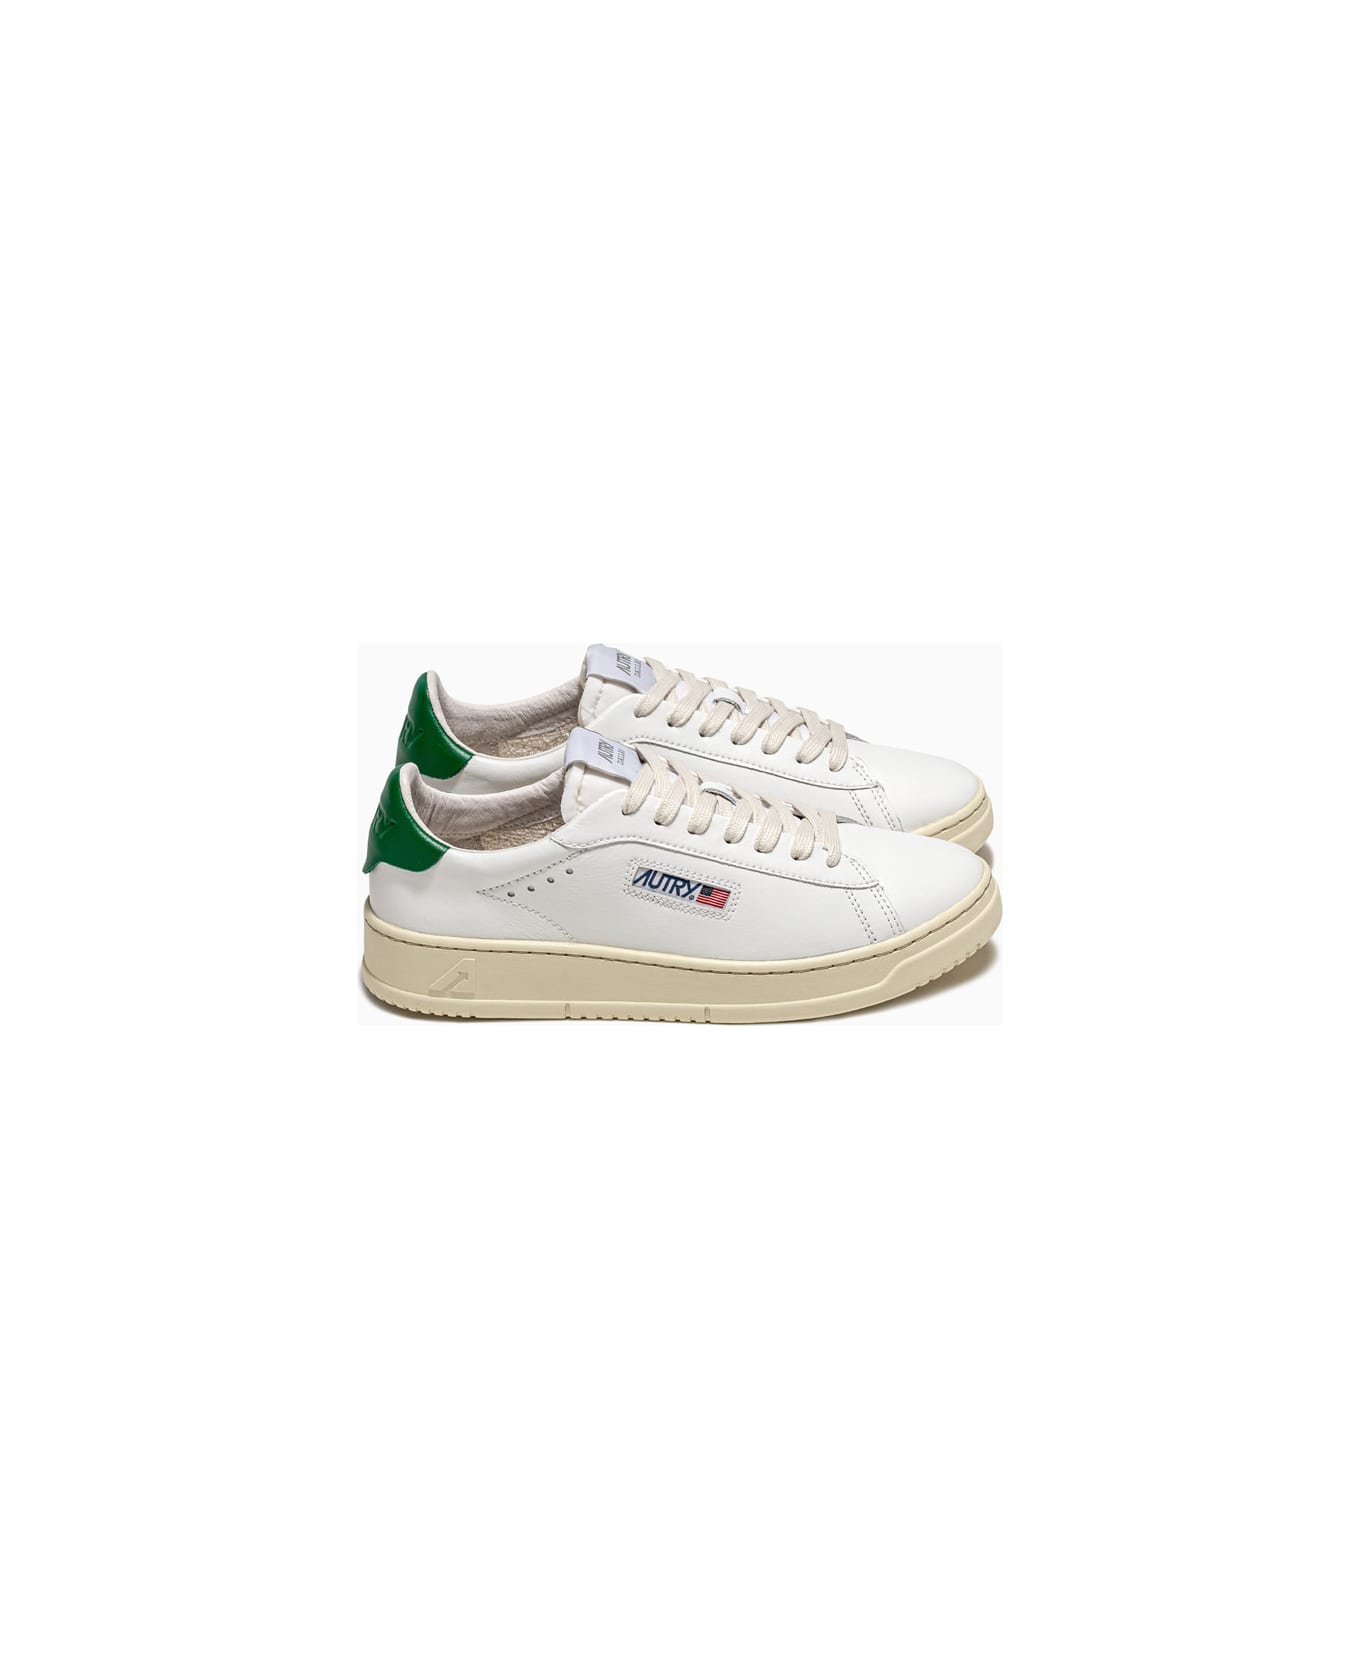 Autry Dallas Low Sneakers Adlw Nw02 - LEAT/LEAT WHT/AM